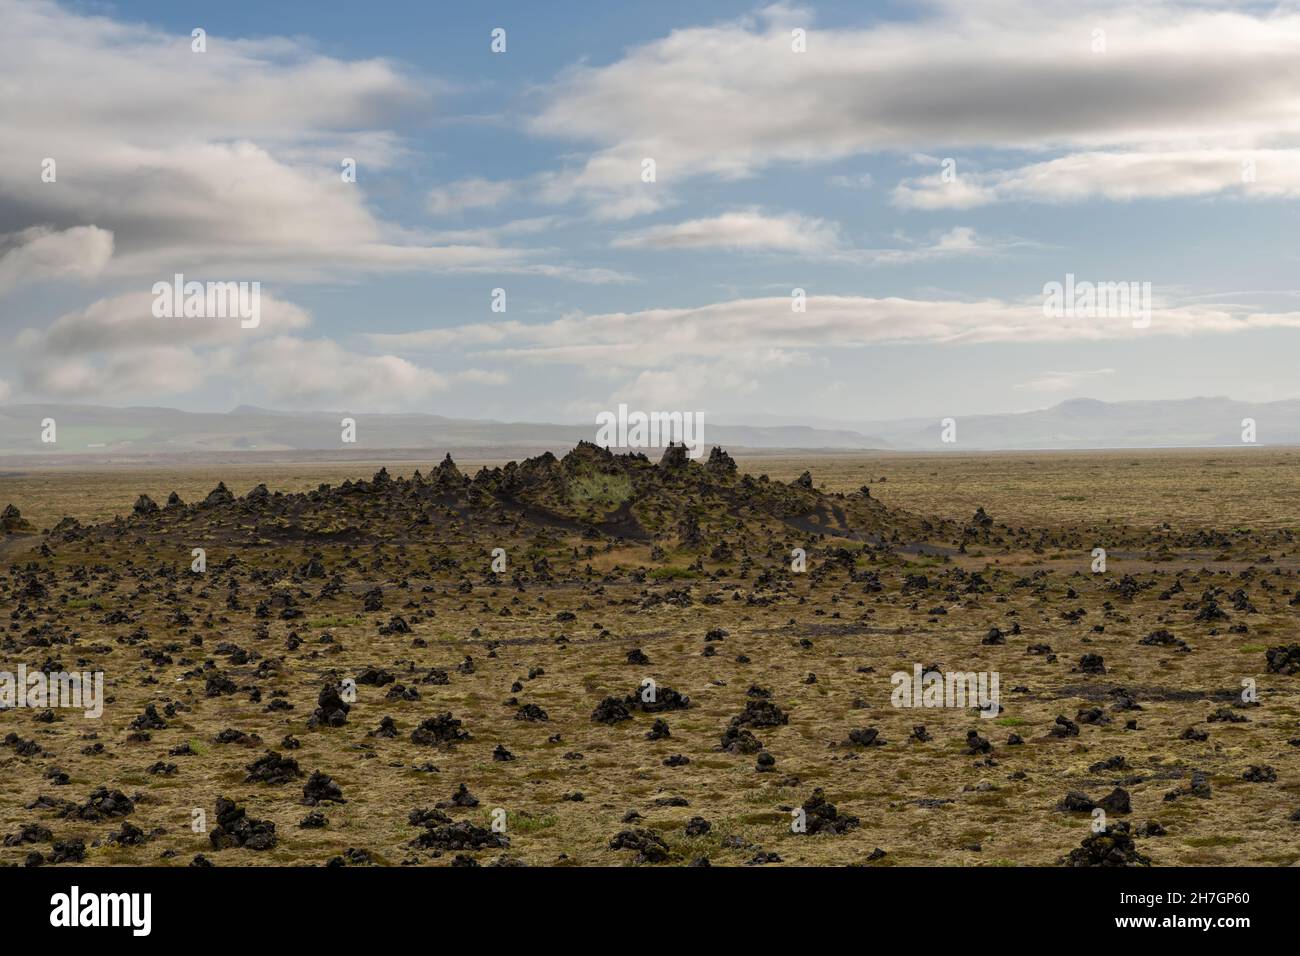 Panoramic view over Laufskalavarða lava ridge in Iceland, surrounded by stone cairns or stone piles built by travellers crossing the desert Stock Photo